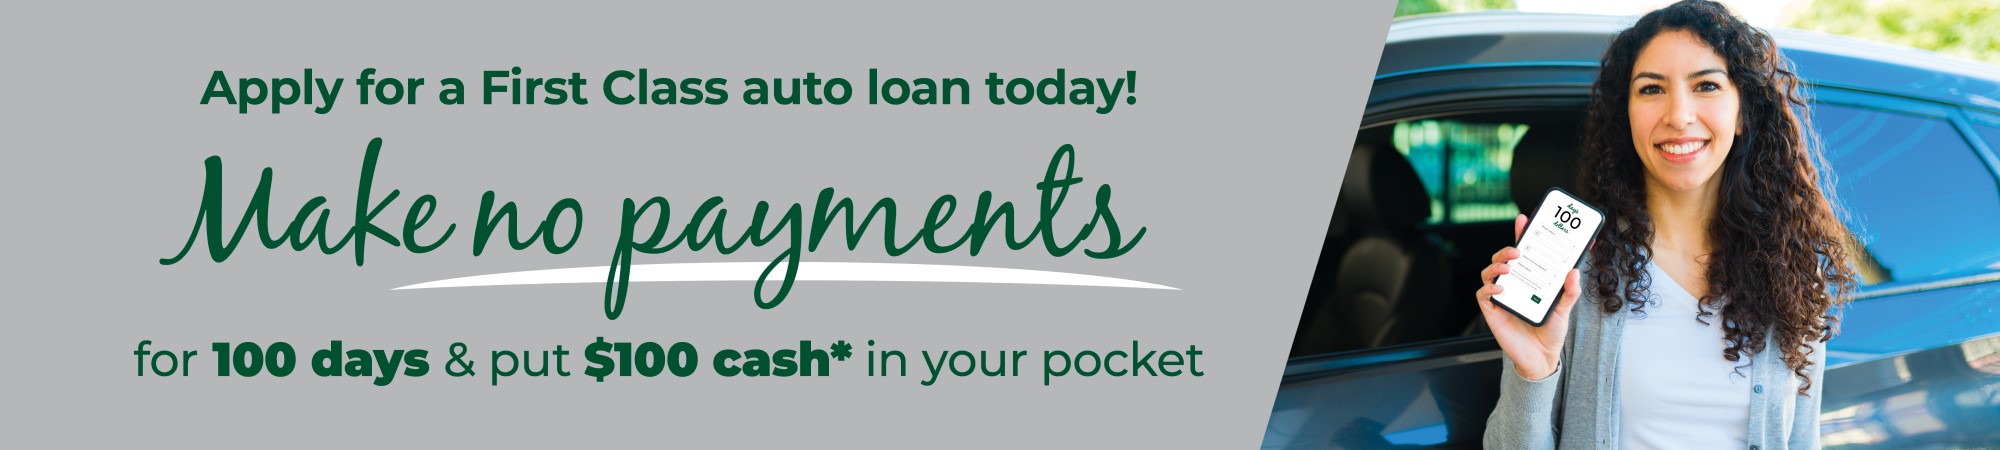 Apply for a First Class auto loan today! Make no payments for 100 days & put $100 cash* in your pocket.